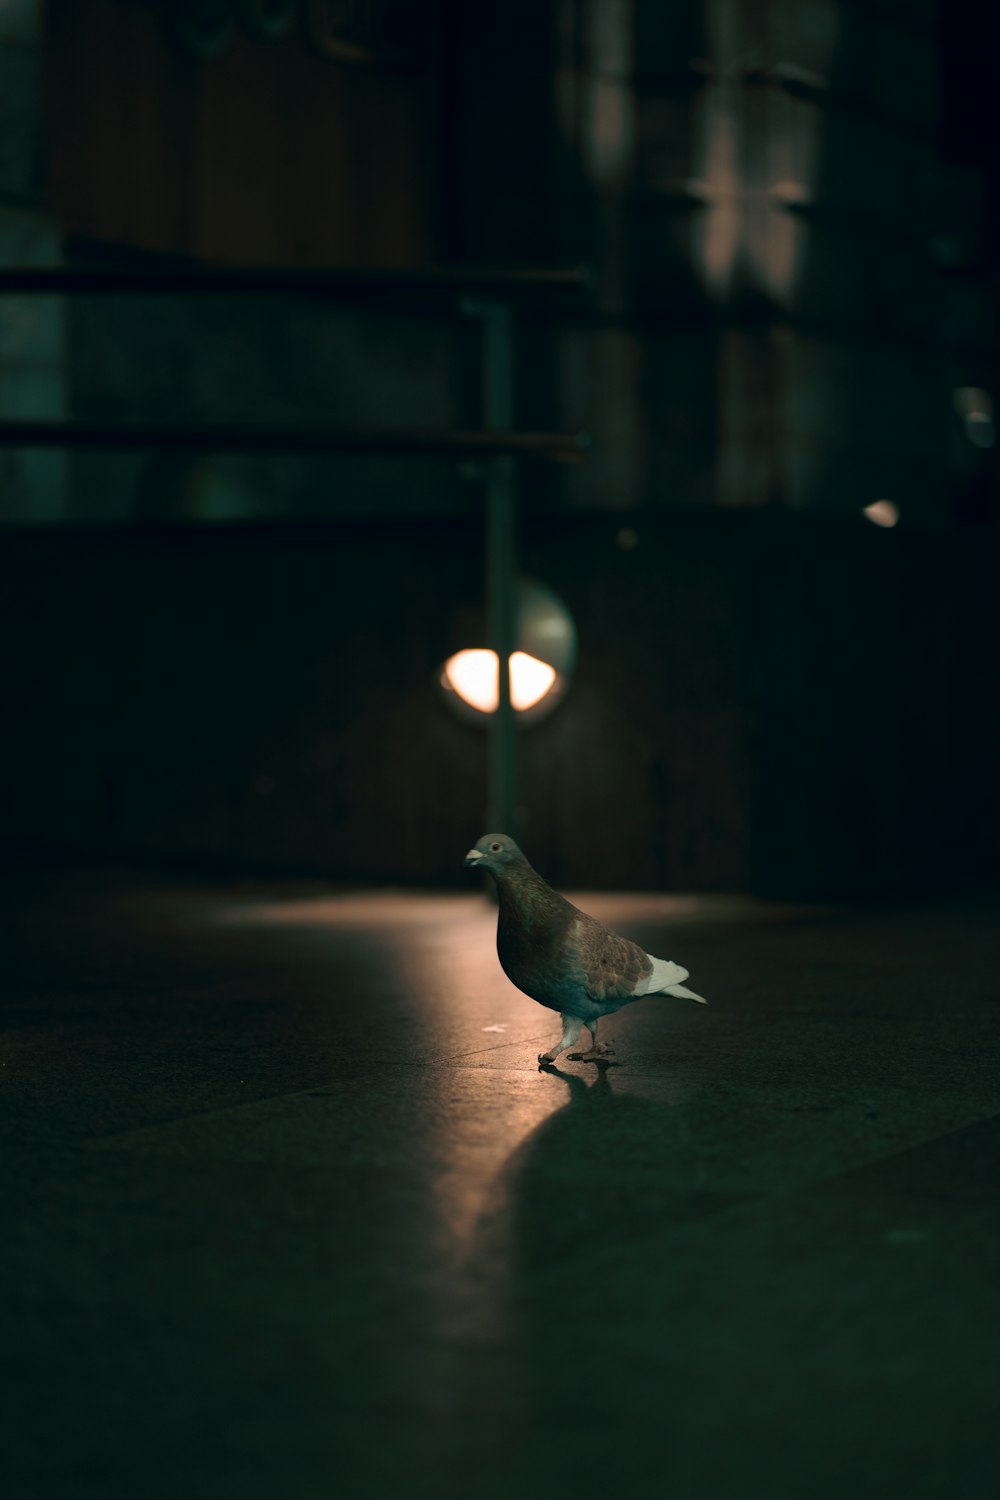 a small bird standing on the ground in the dark